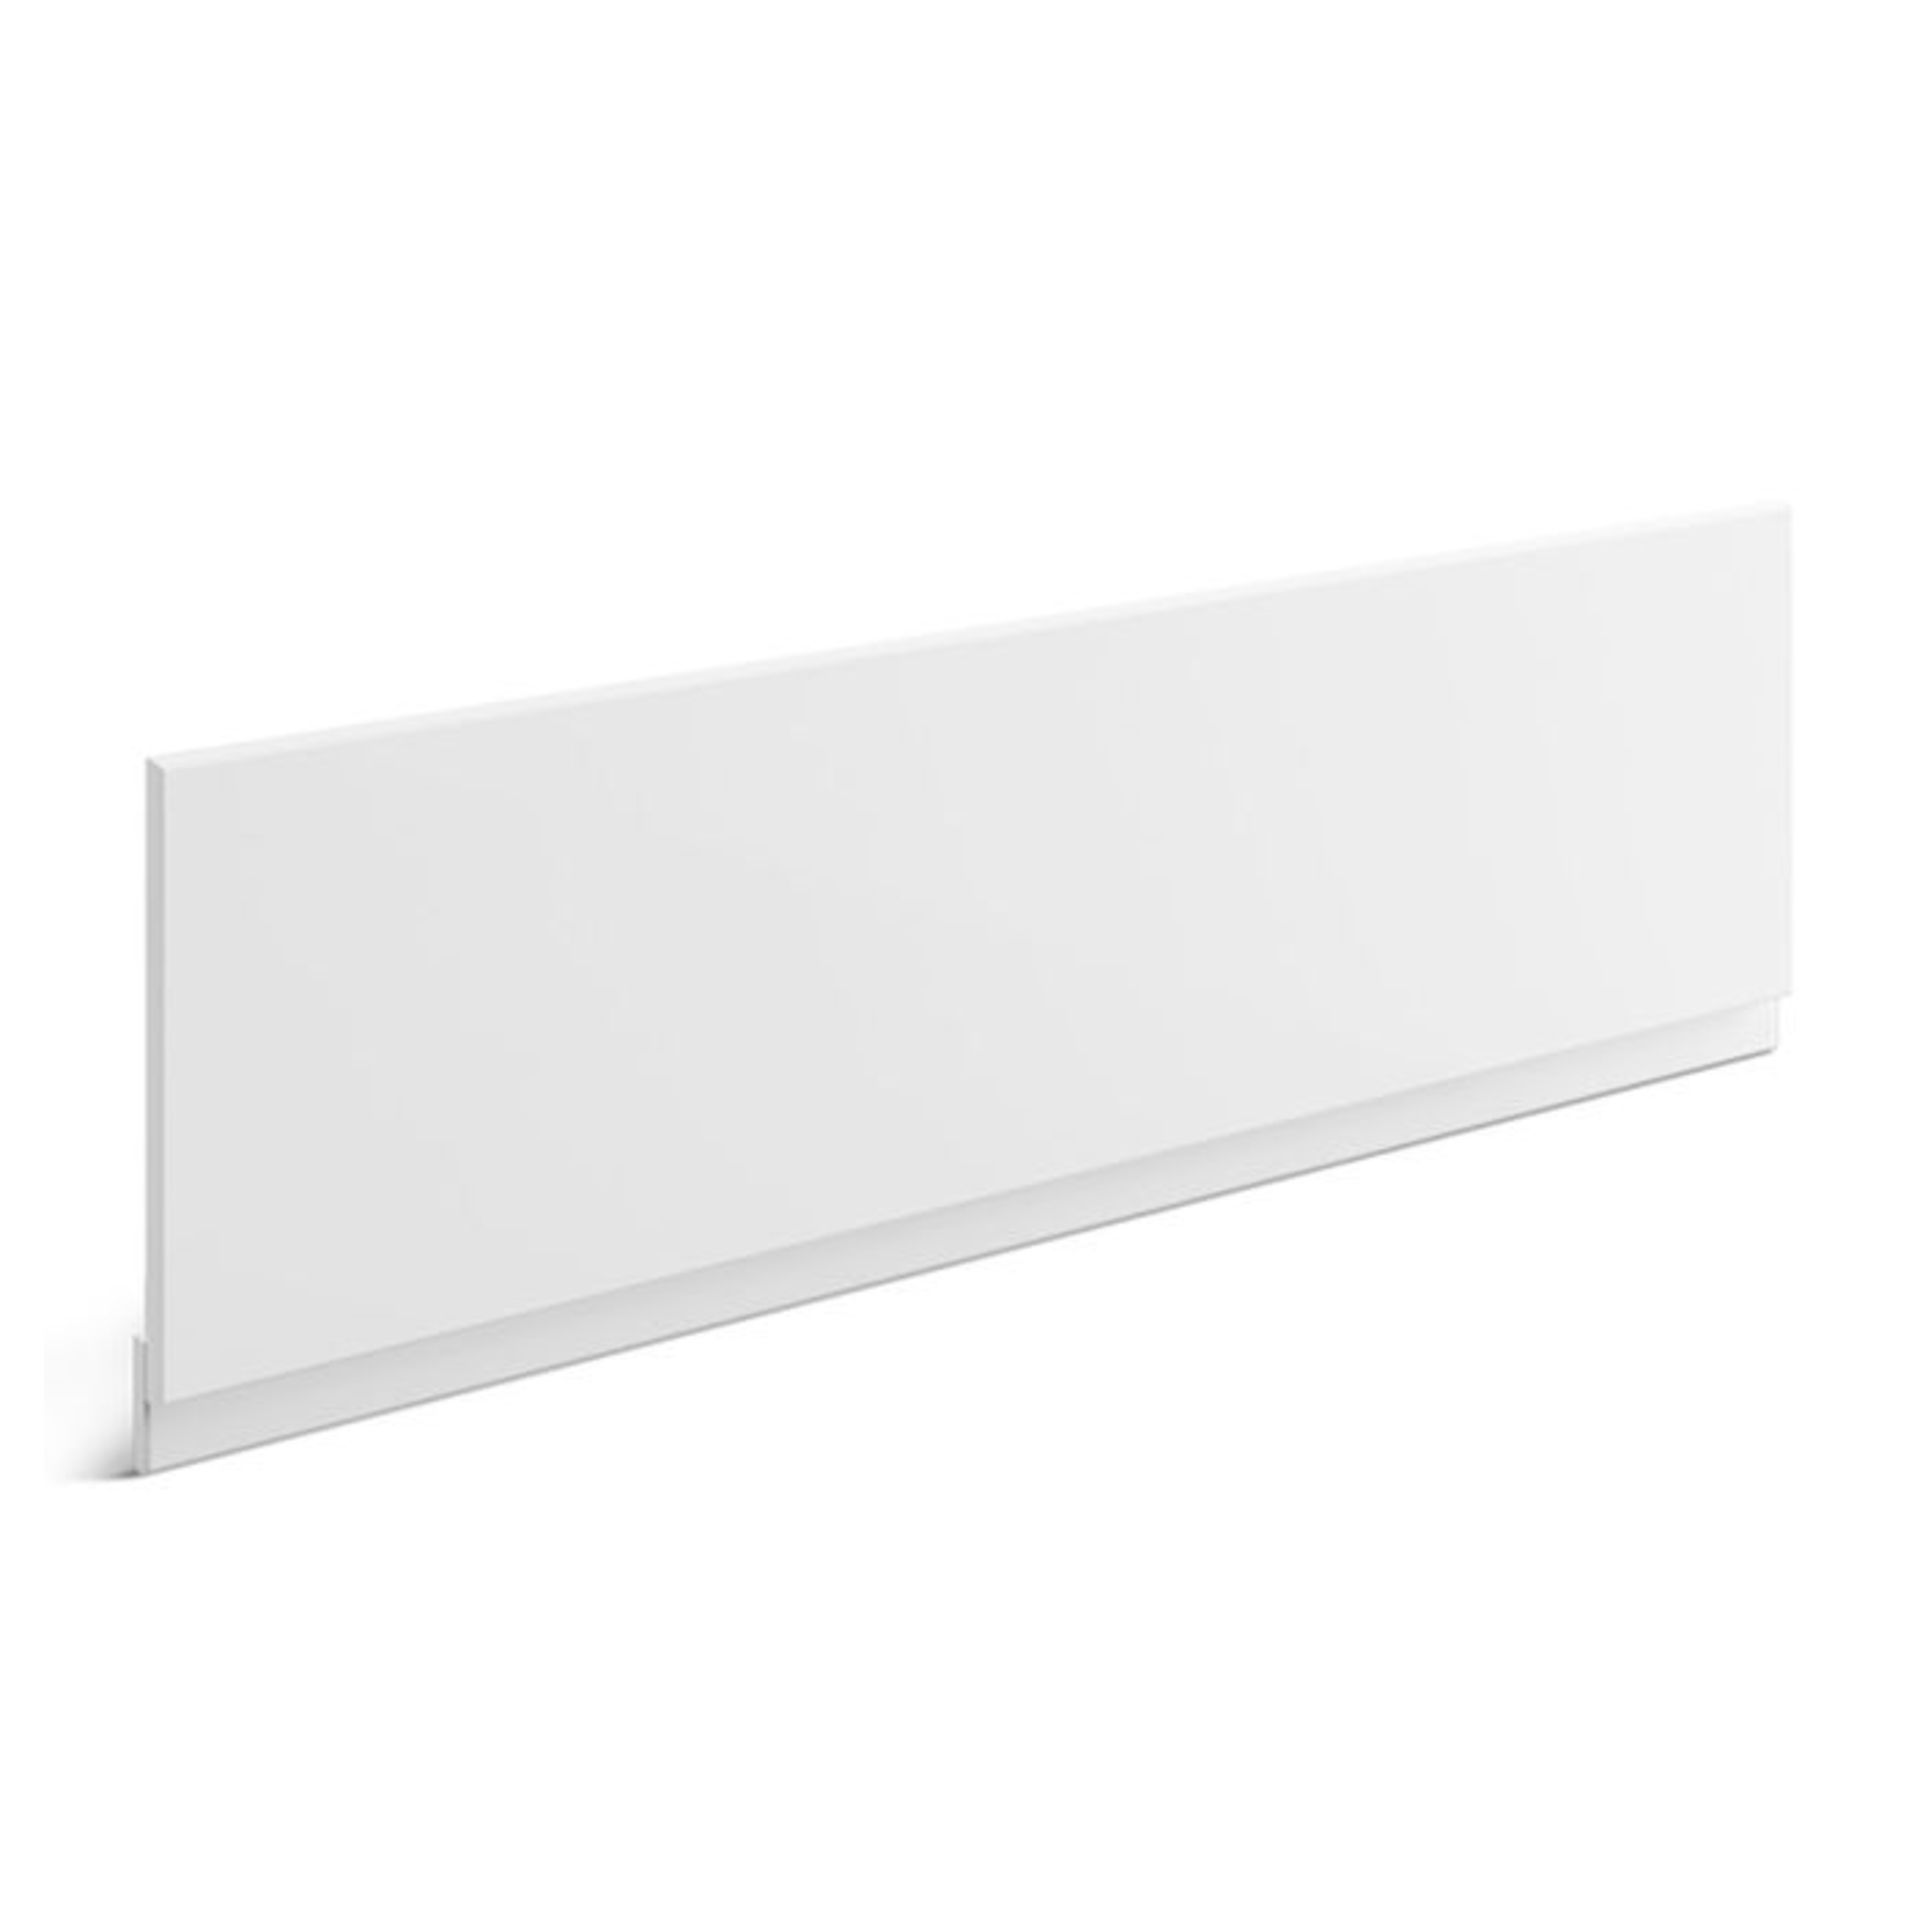 (KL151) 1700mm White MDF Straight Bath Front Panel.Specially selected to provide robustness 18mm